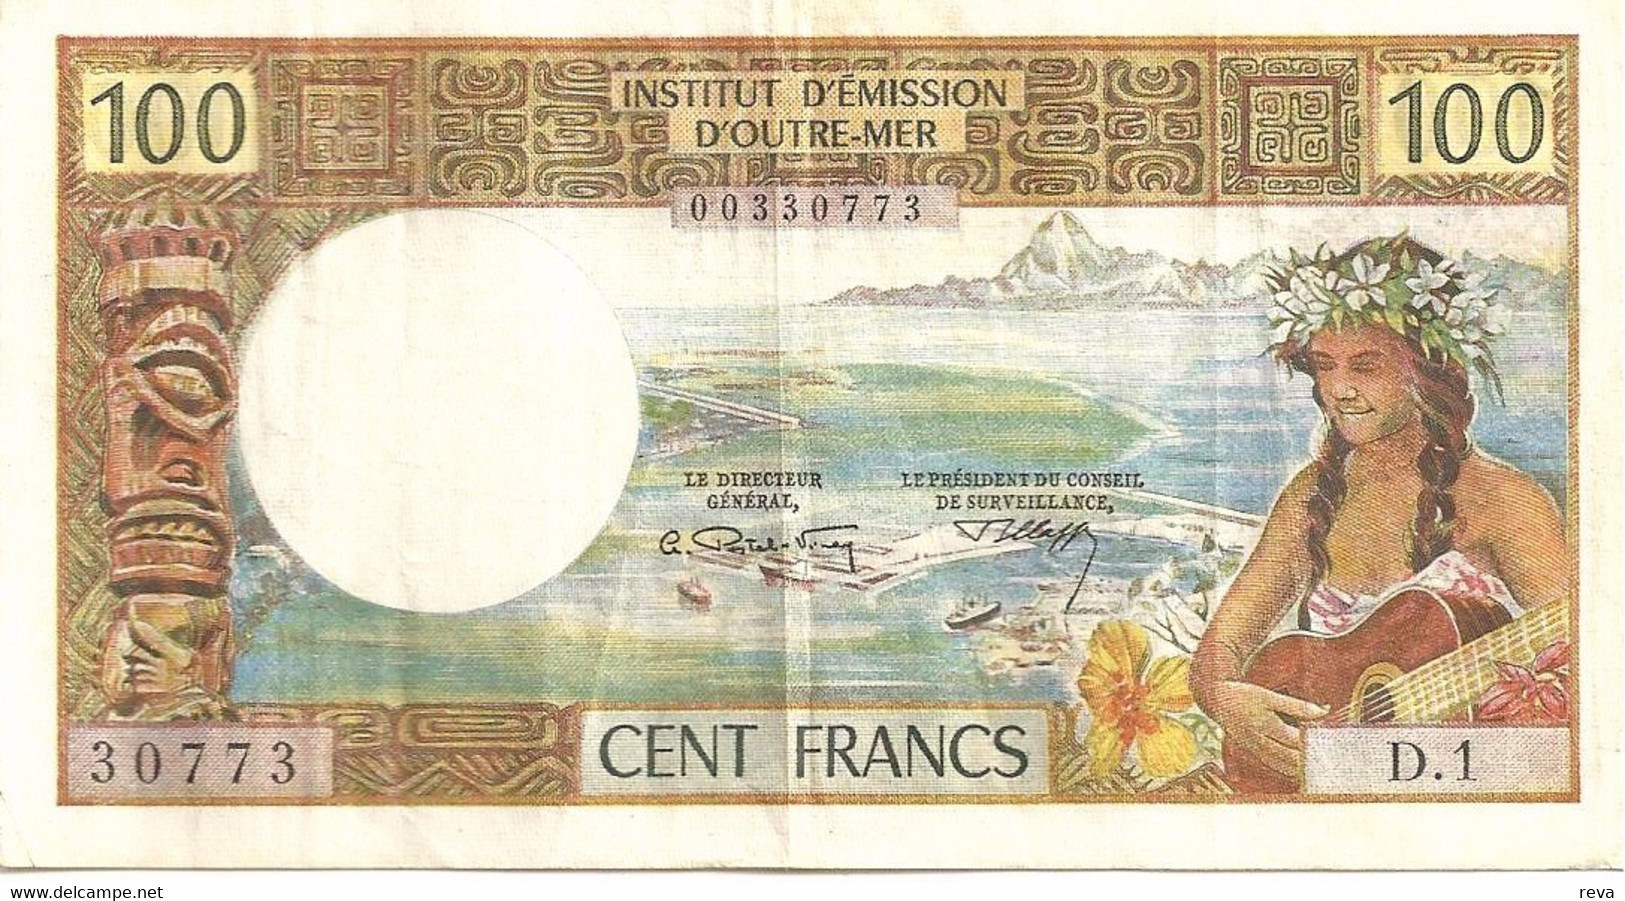 FRENCH POLYNESIA 100 FRANCS BROWN WOMAN FRONT WOMAN HEAD BACK NOT DATED(1971) P24b SIG VARIETY F READ DESCRIPTION!! - Papeete (Frans-Polynesië 1914-1985)